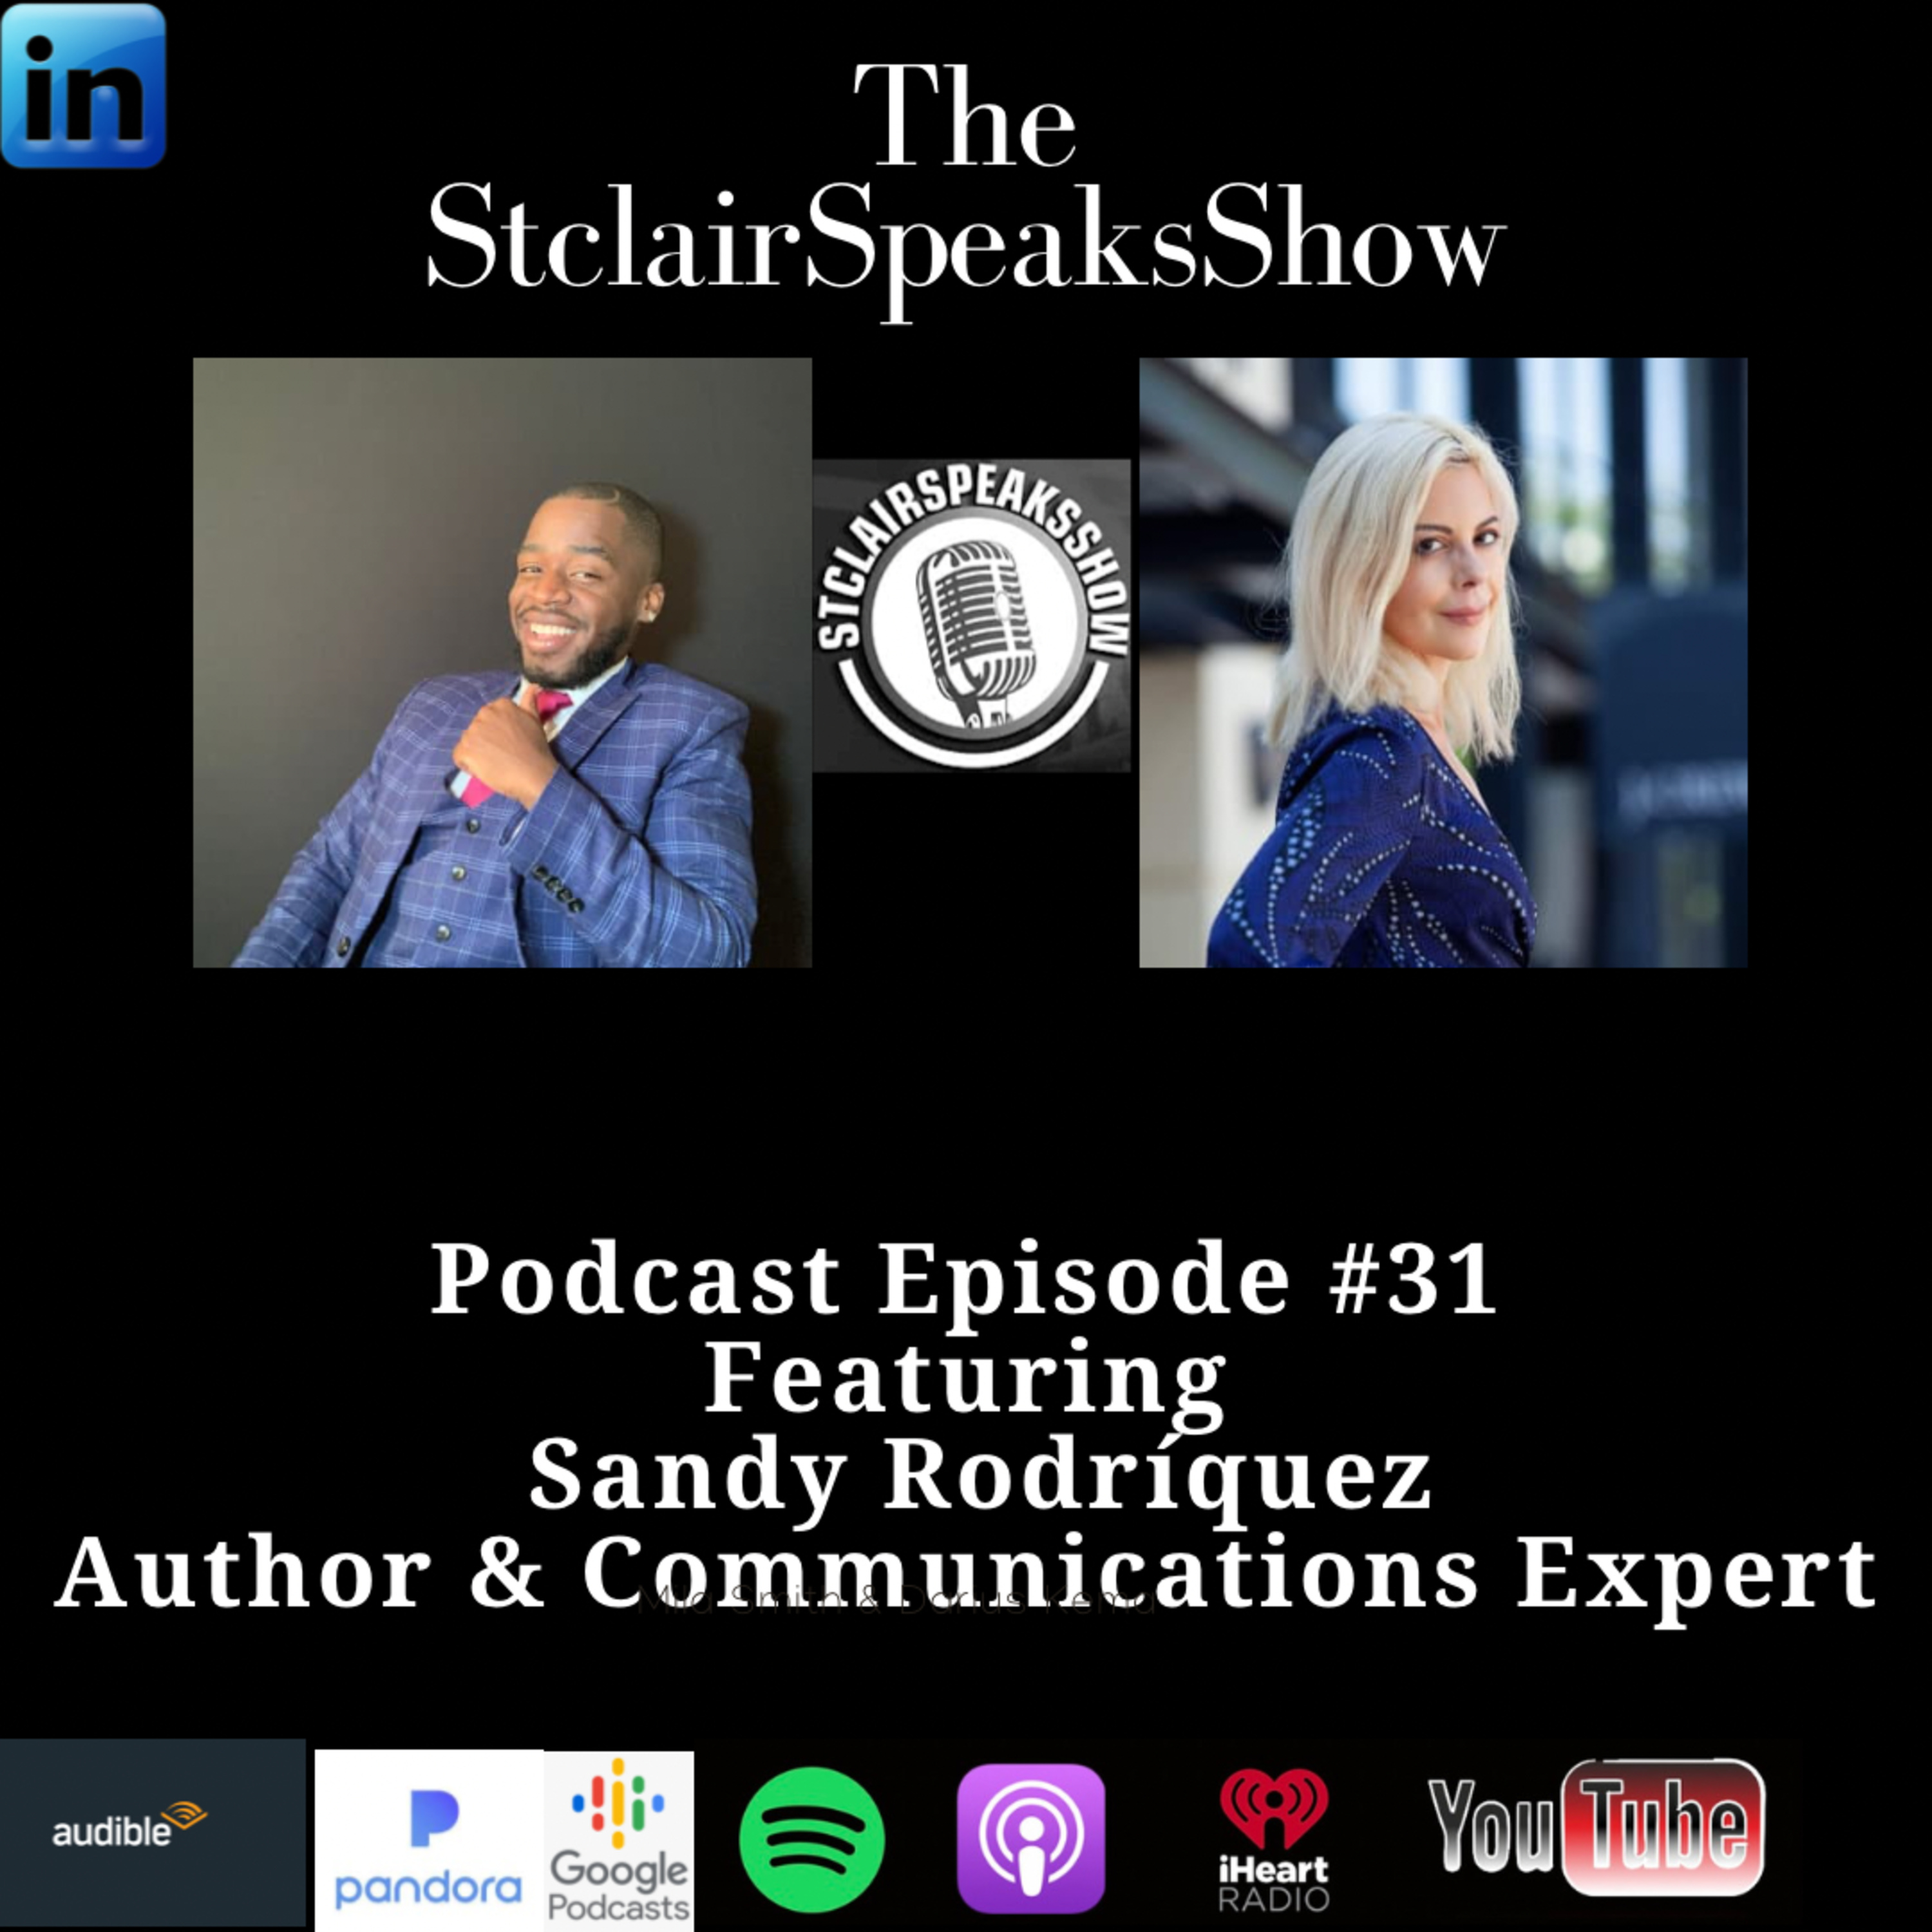 The StclairSpeaksshow Podcast Featuring Sandy Rodriguez Author & Communications Expert Ep #31 Image